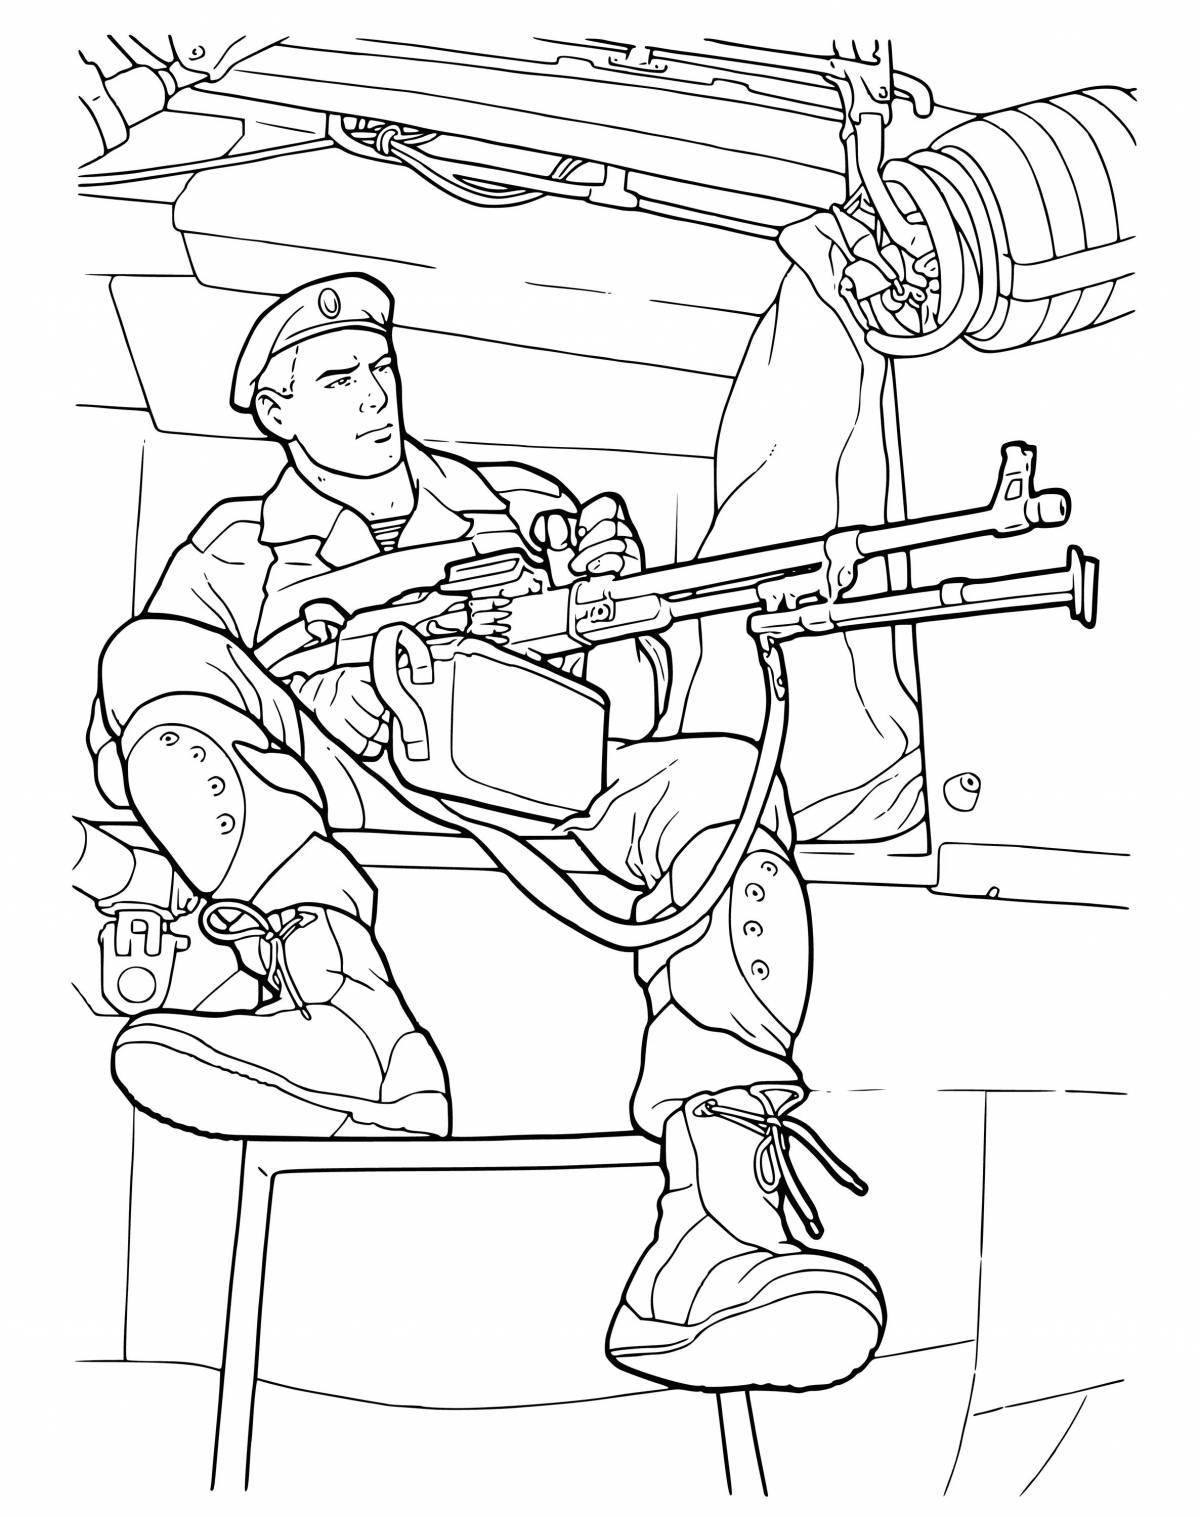 Creative russian army coloring pages for kids